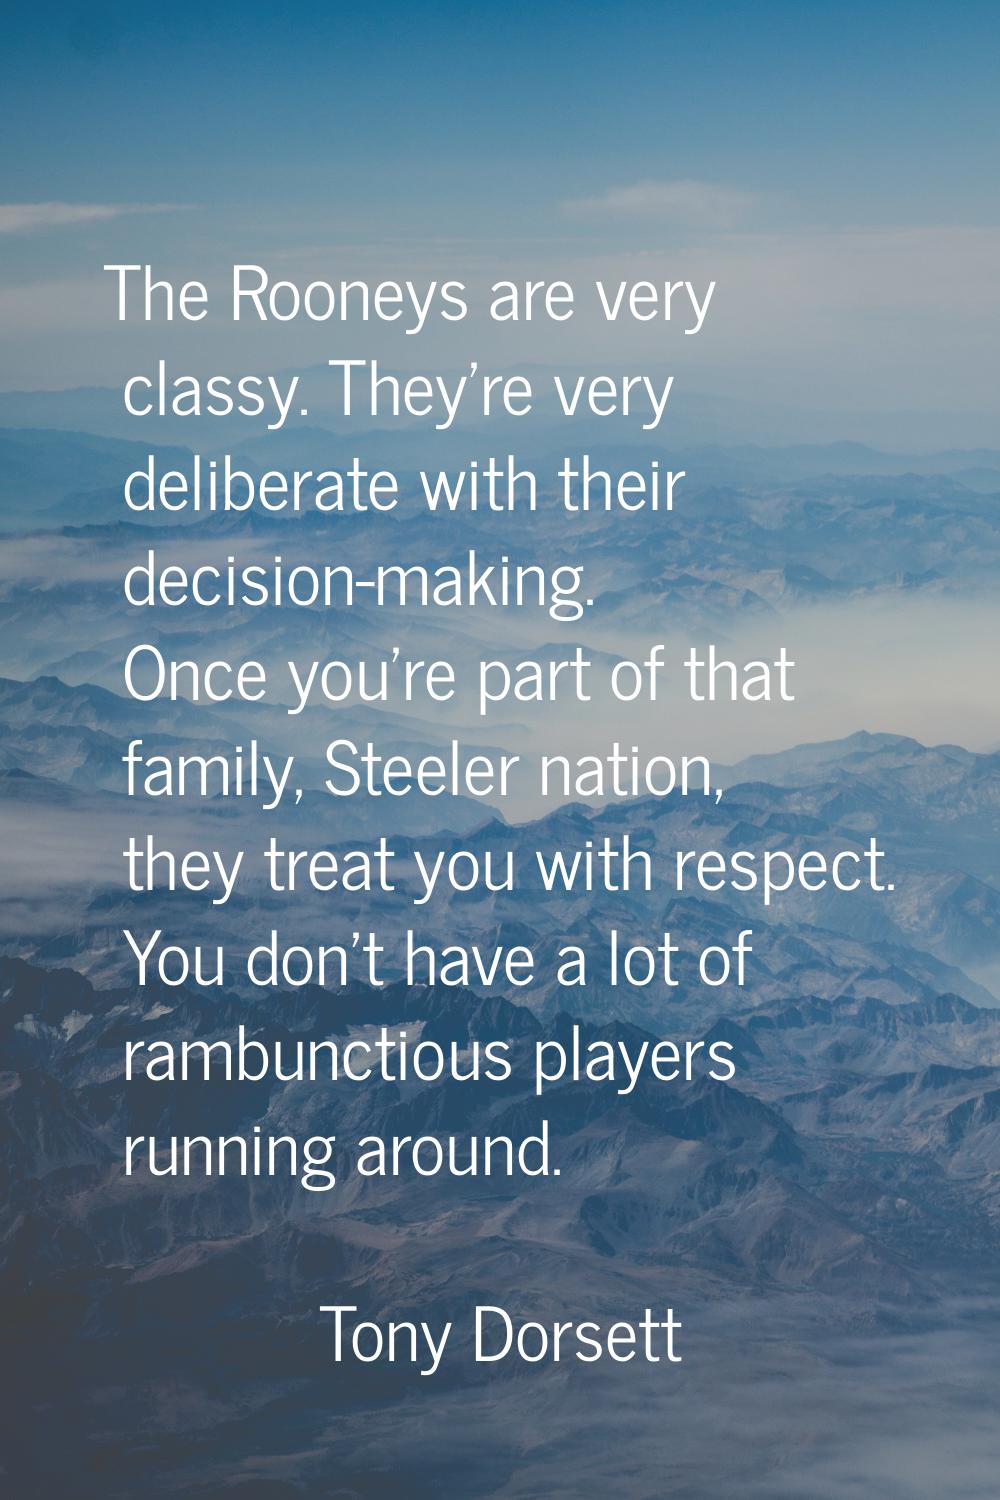 The Rooneys are very classy. They're very deliberate with their decision-making. Once you're part o